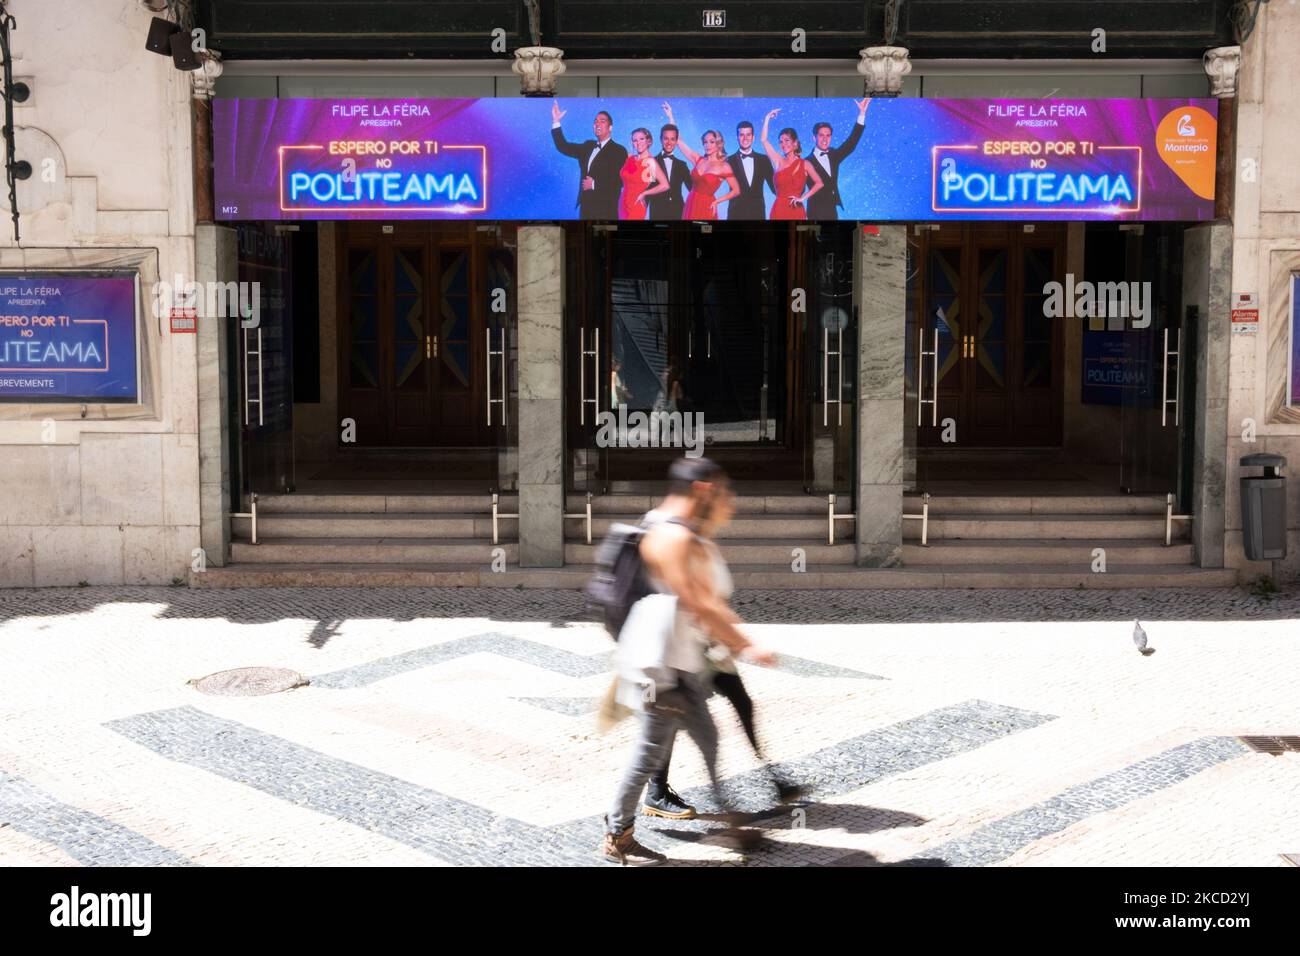 Politeama Theater with the doors open, on April 19, 2021, in Lisbon, Portugal. The Portuguese government has established a four-step plan to ease COVID-19 restrictions, with the third stage starting on April 19th with the reopening all shops and shopping centres, Cinemas, auditoriums, theaters, Secondary and higher education resumes with face to face classes, Outdoor events with reduced capacity (Photo by Nuno Cruz/NurPhoto) Stock Photo